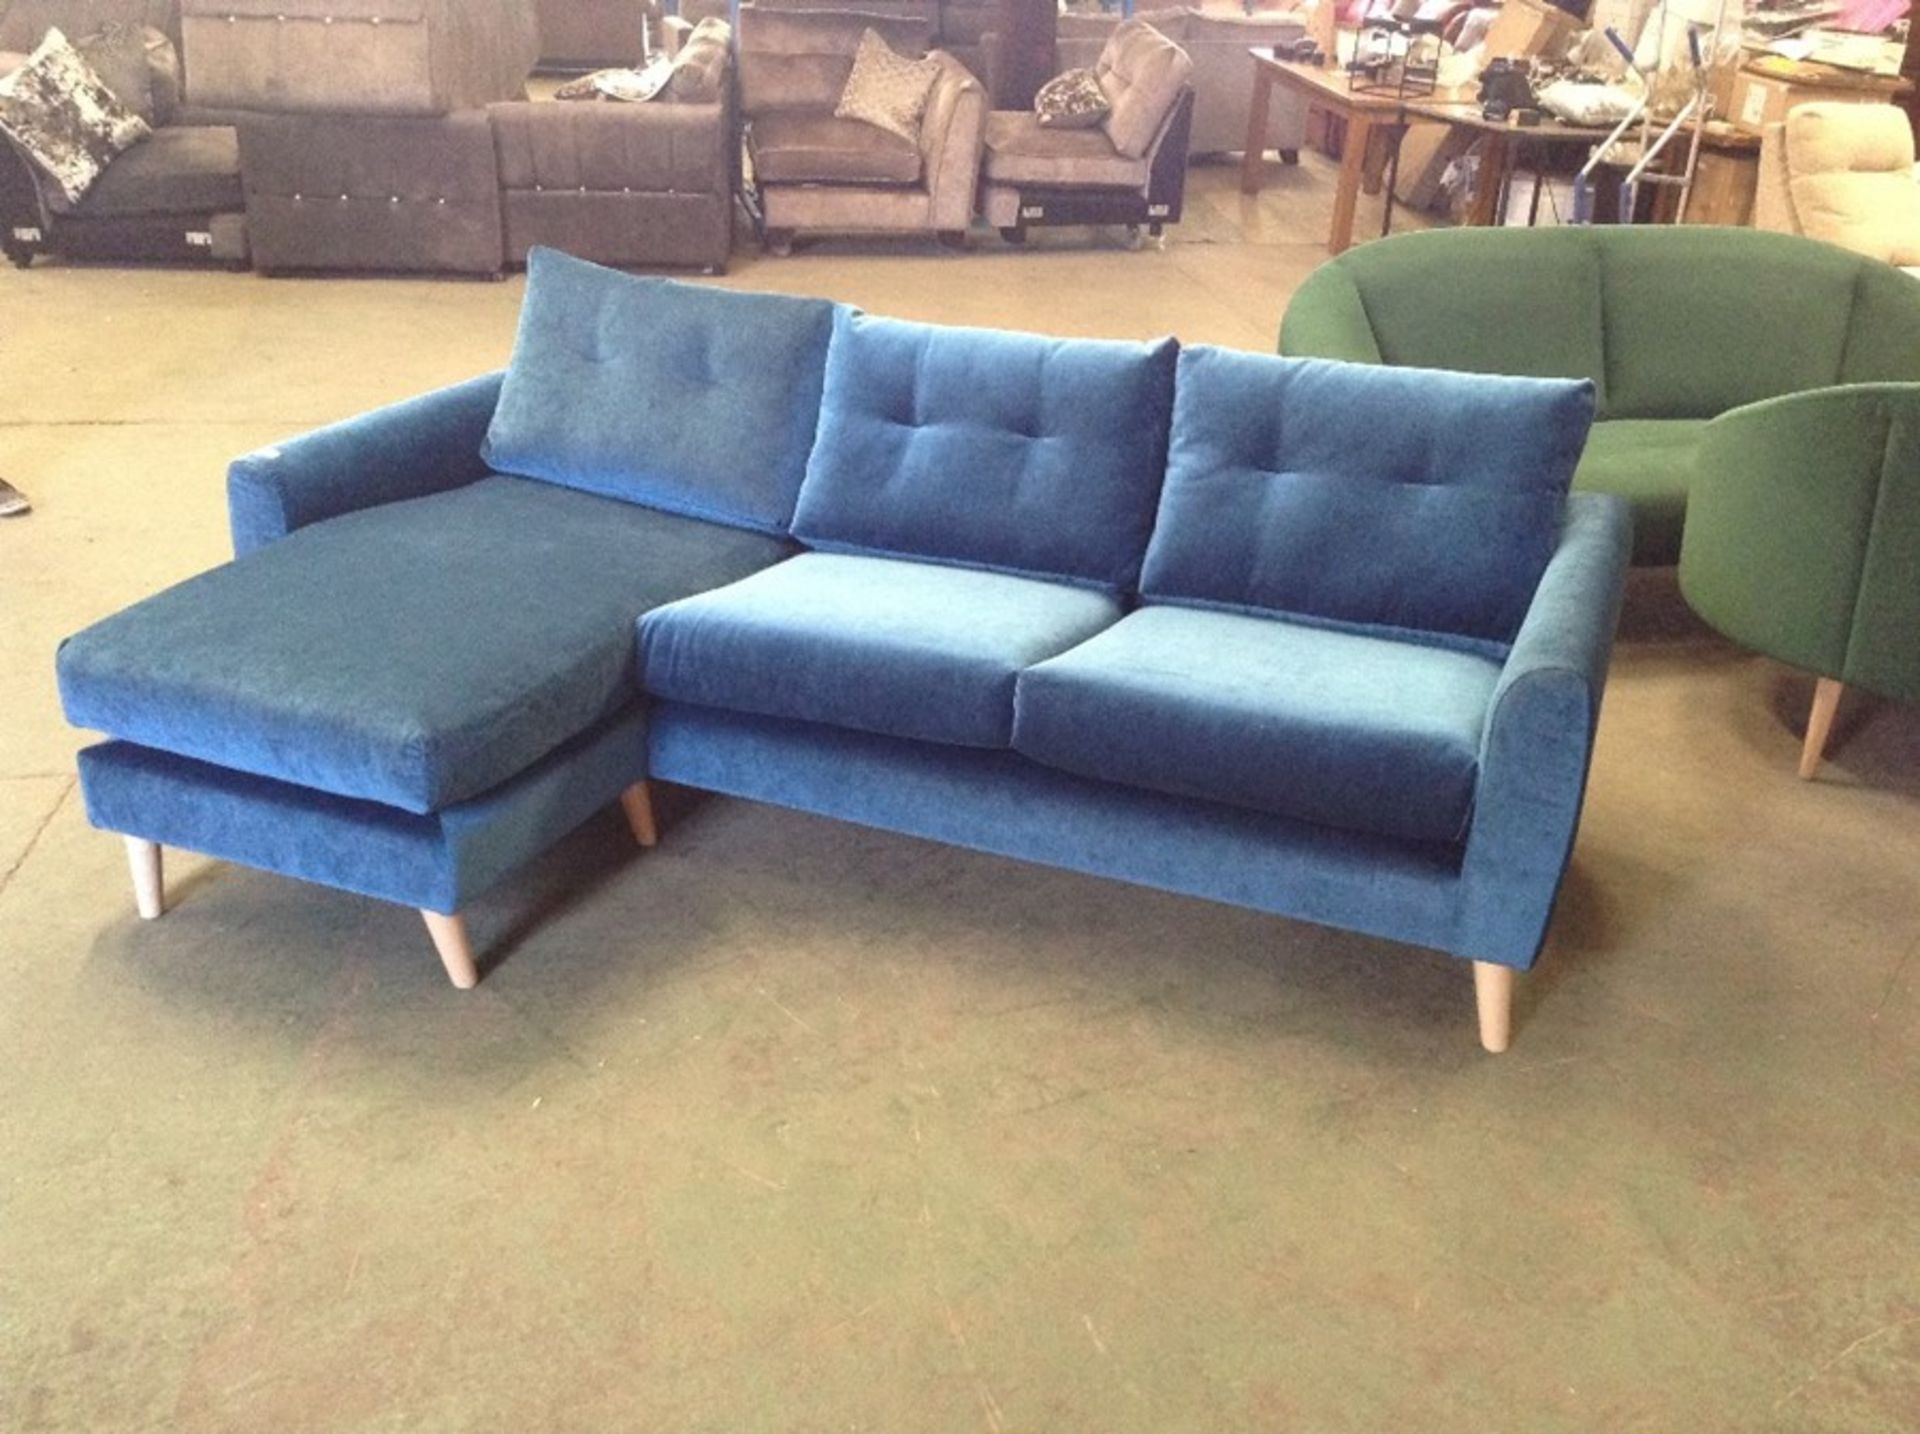 DYLAN VICTORIA TEAL LHF CHAISE UNIT (SFL1240 -S523